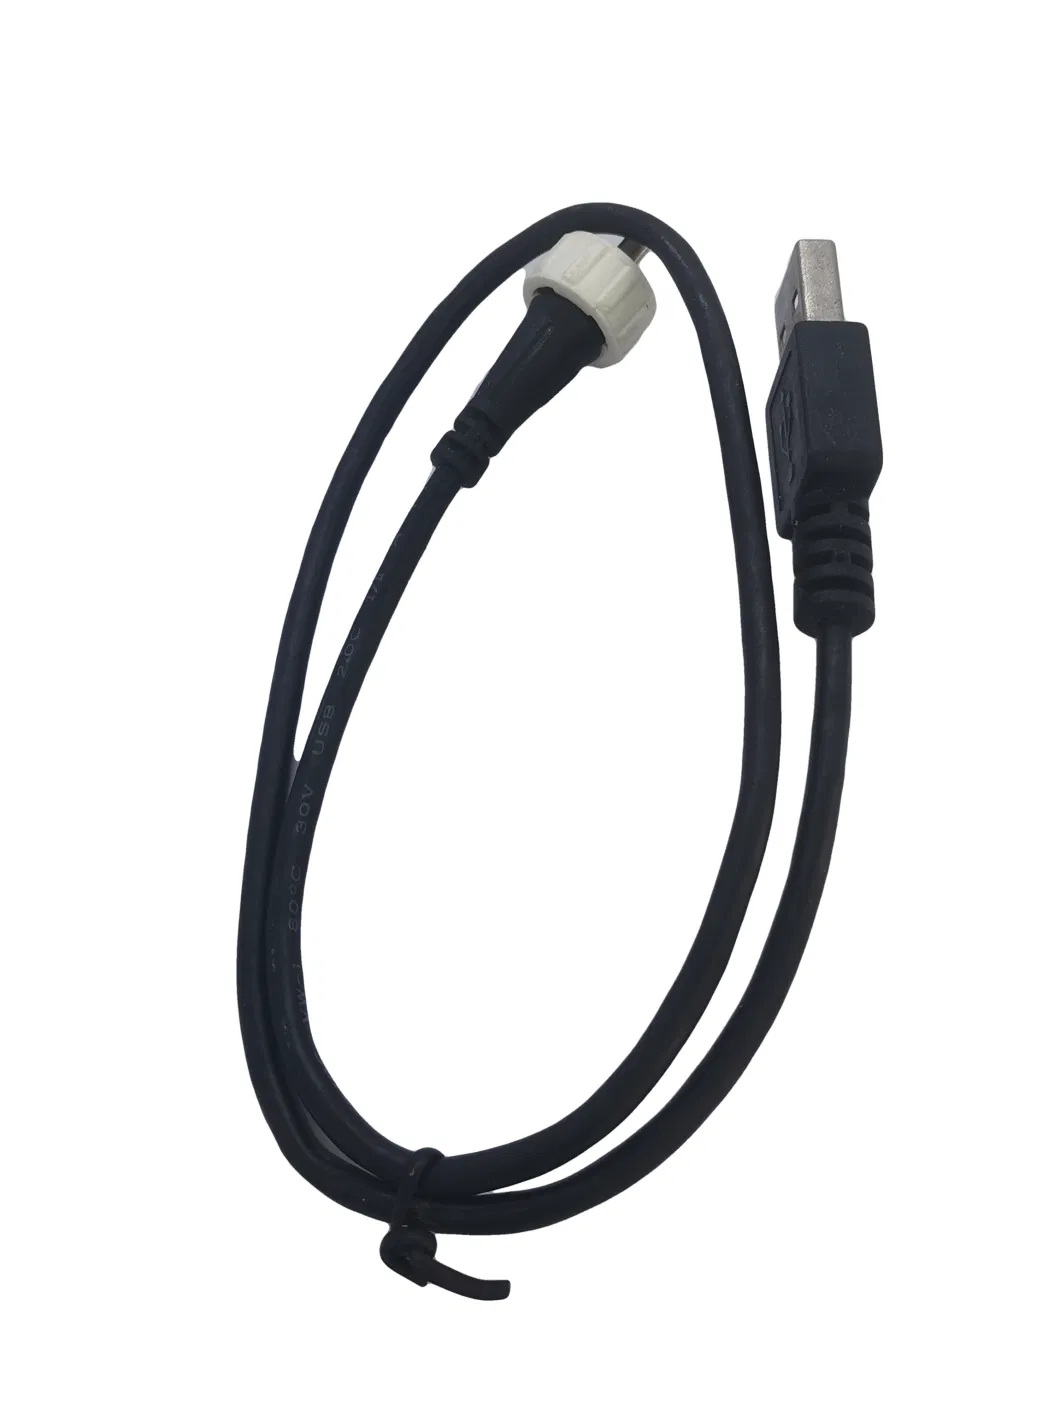 USB to Waterproof Ladder Interface Cable